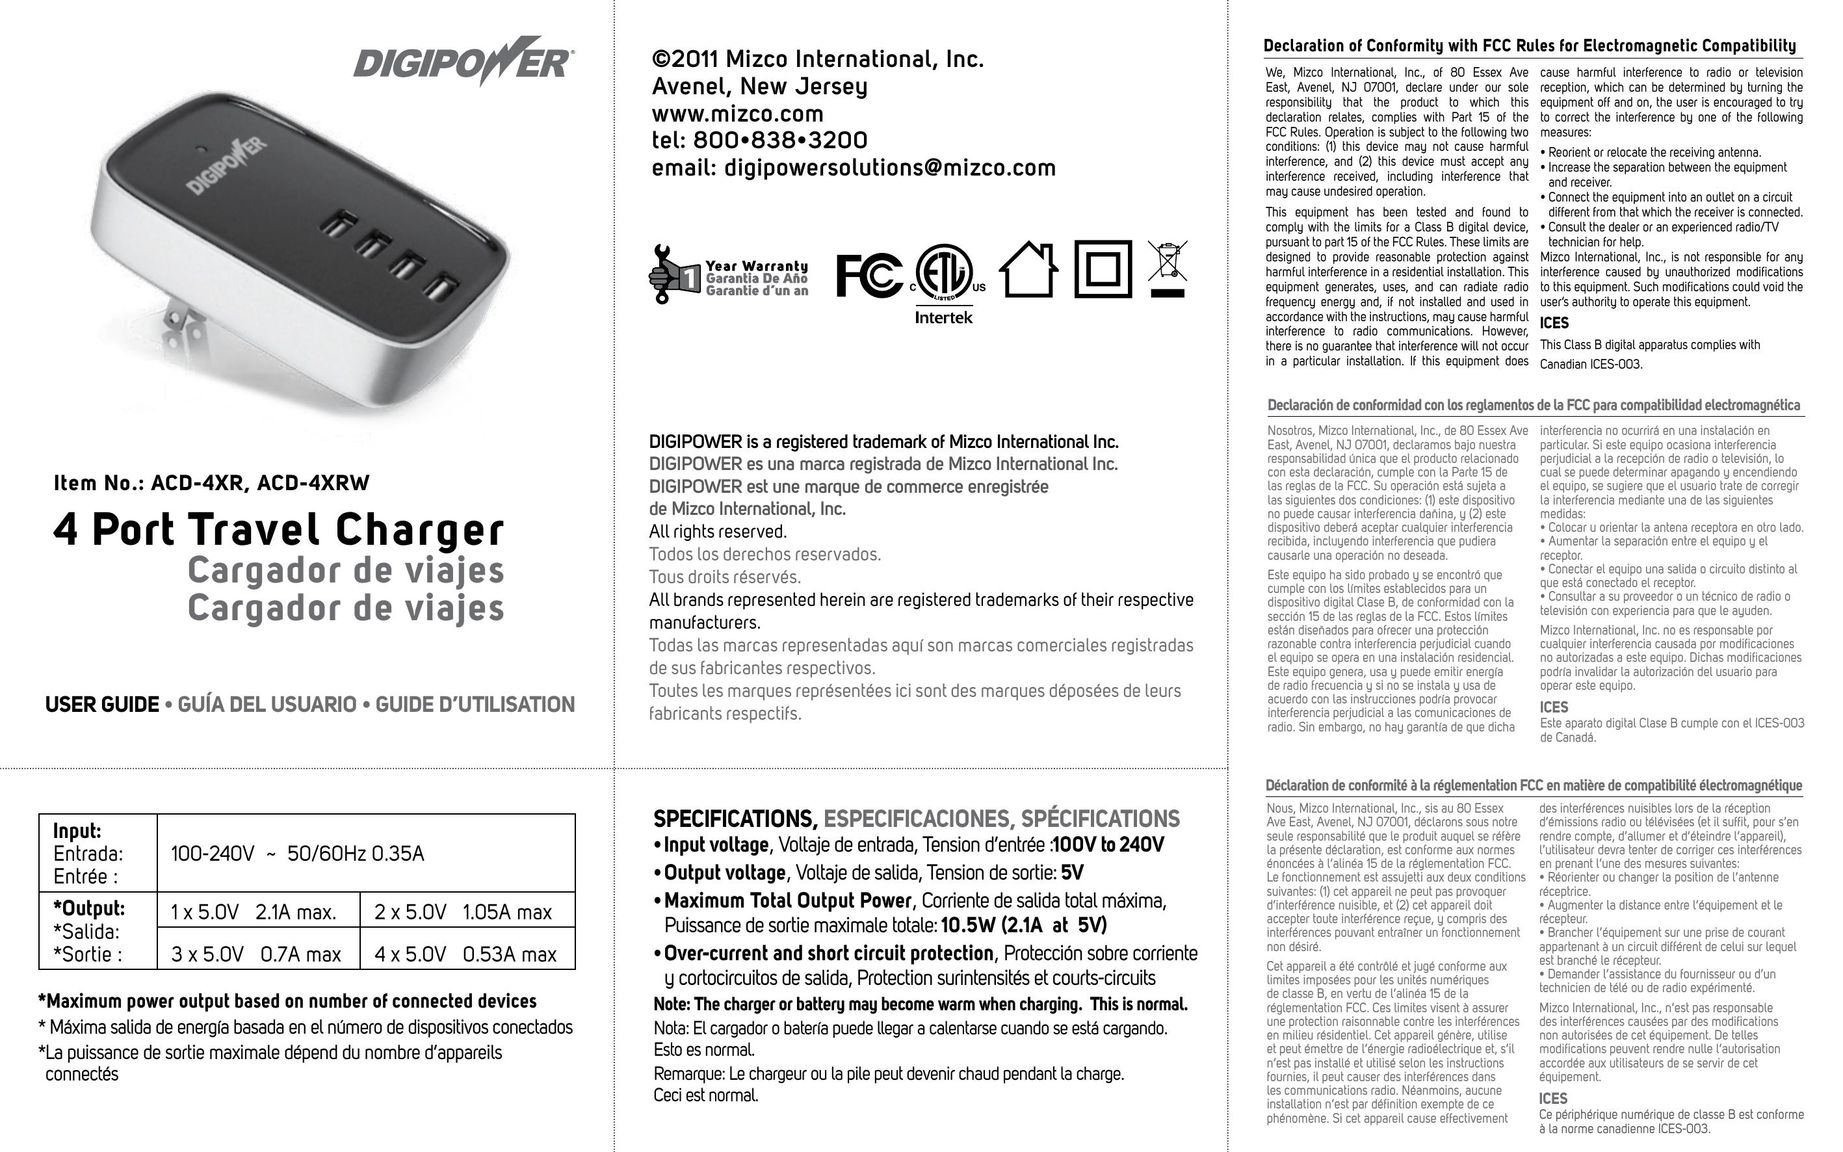 DigiPower ACD-4XR Battery Charger User Manual